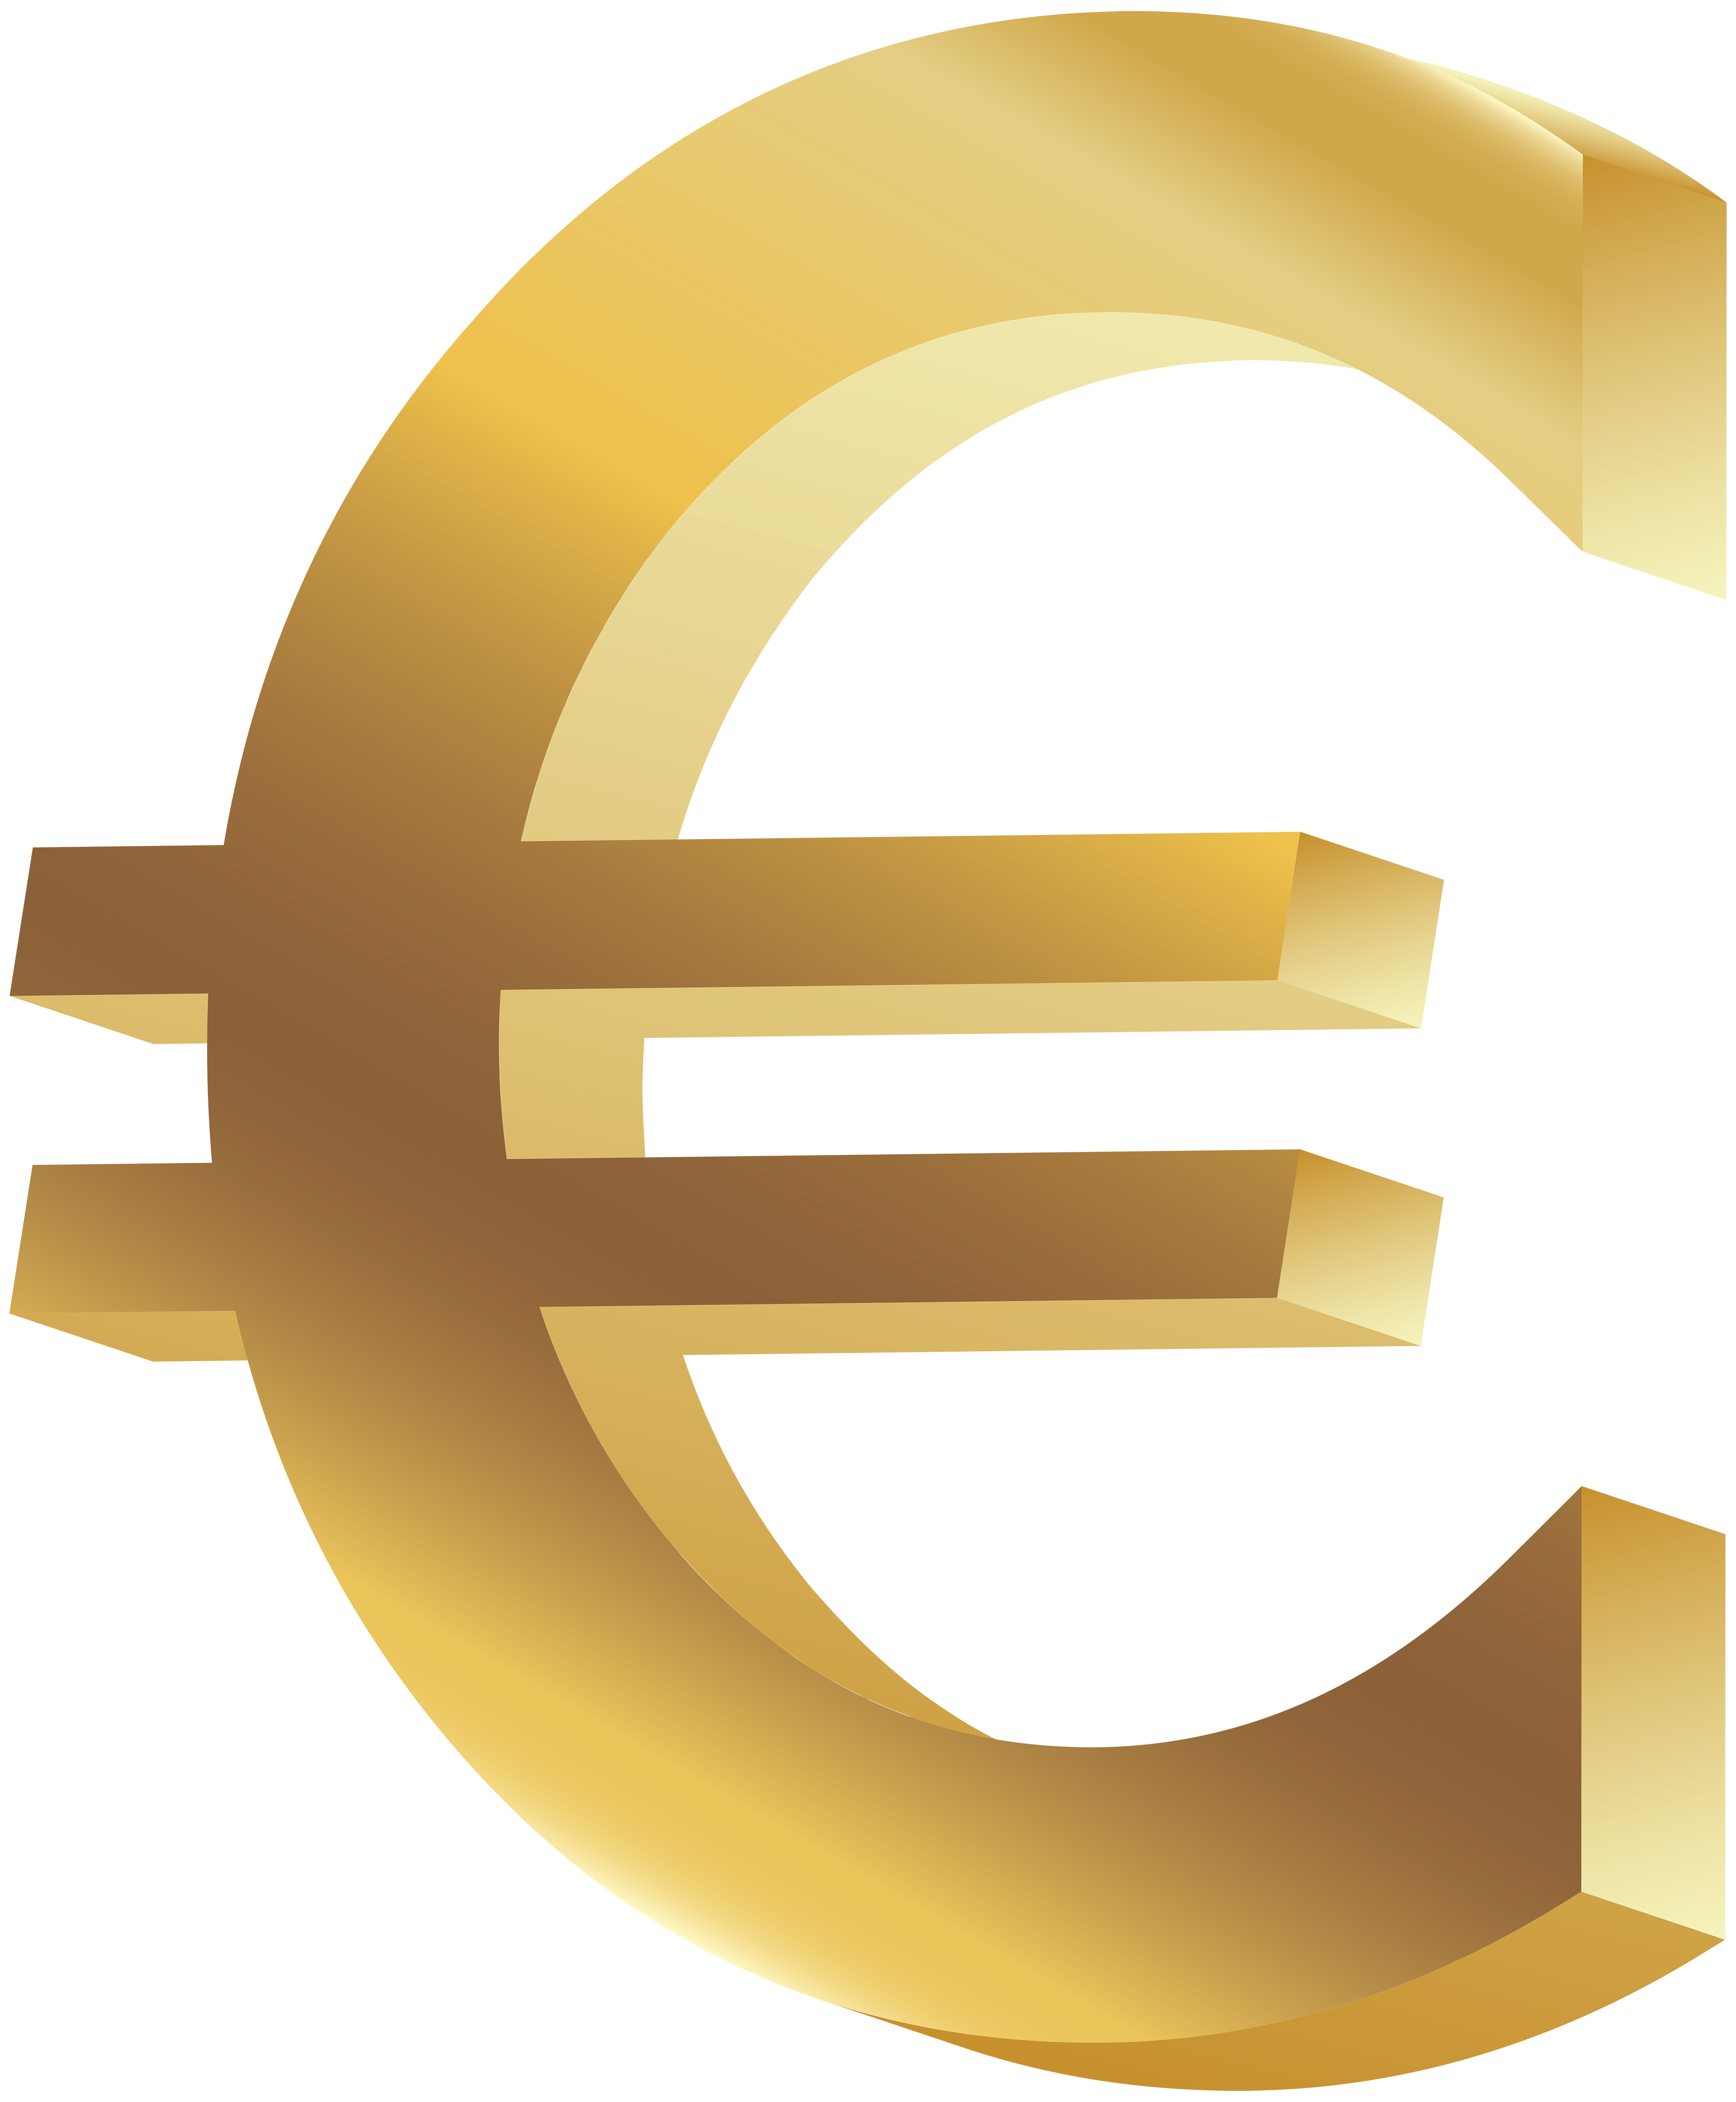 Euro sign clipart - Clipground